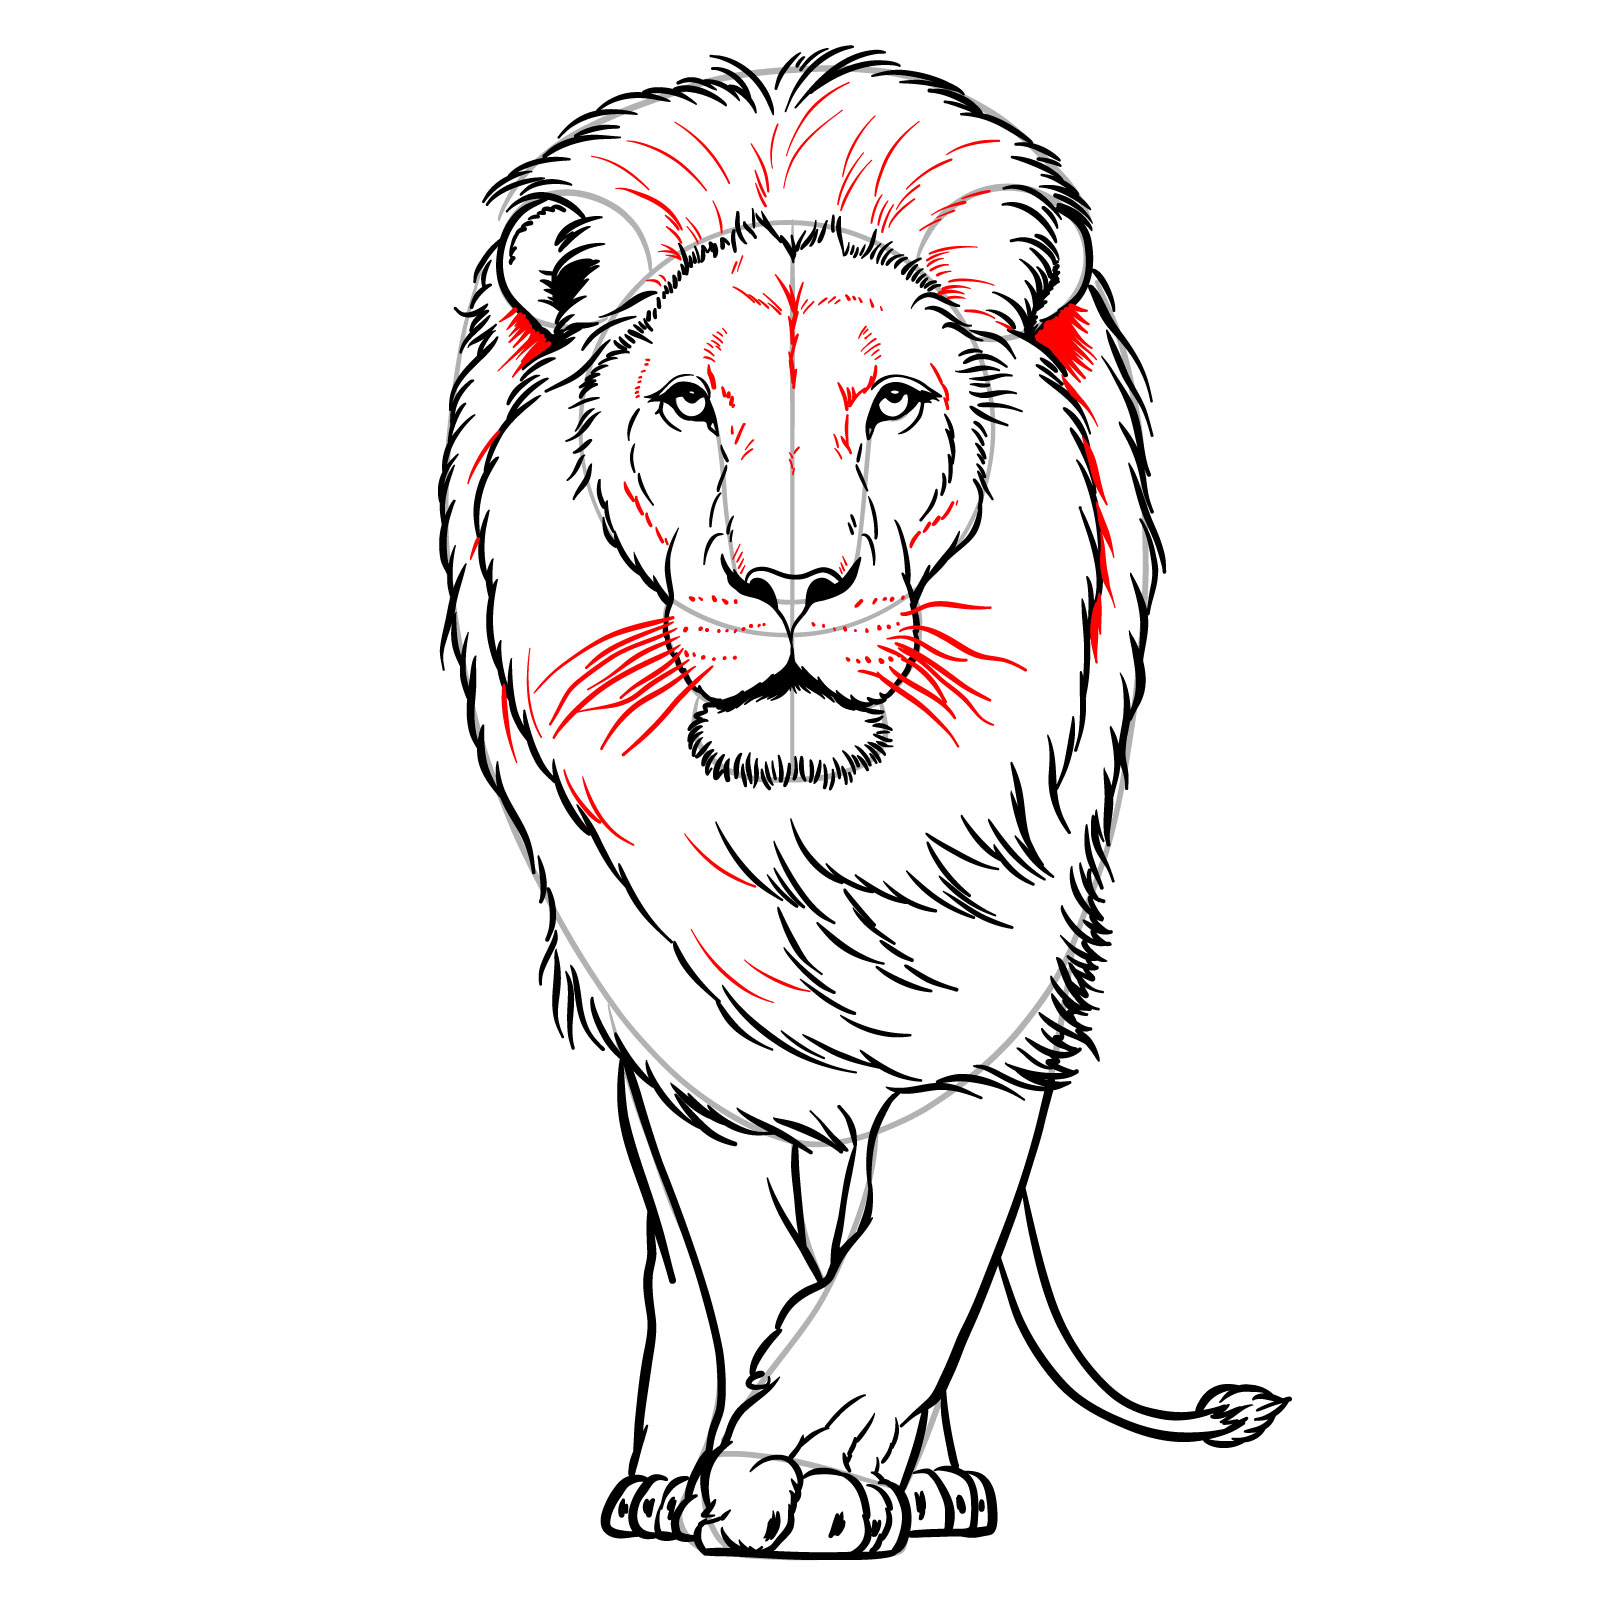 How to draw a walking lion's whisker marks, whiskers, and face details - step 14